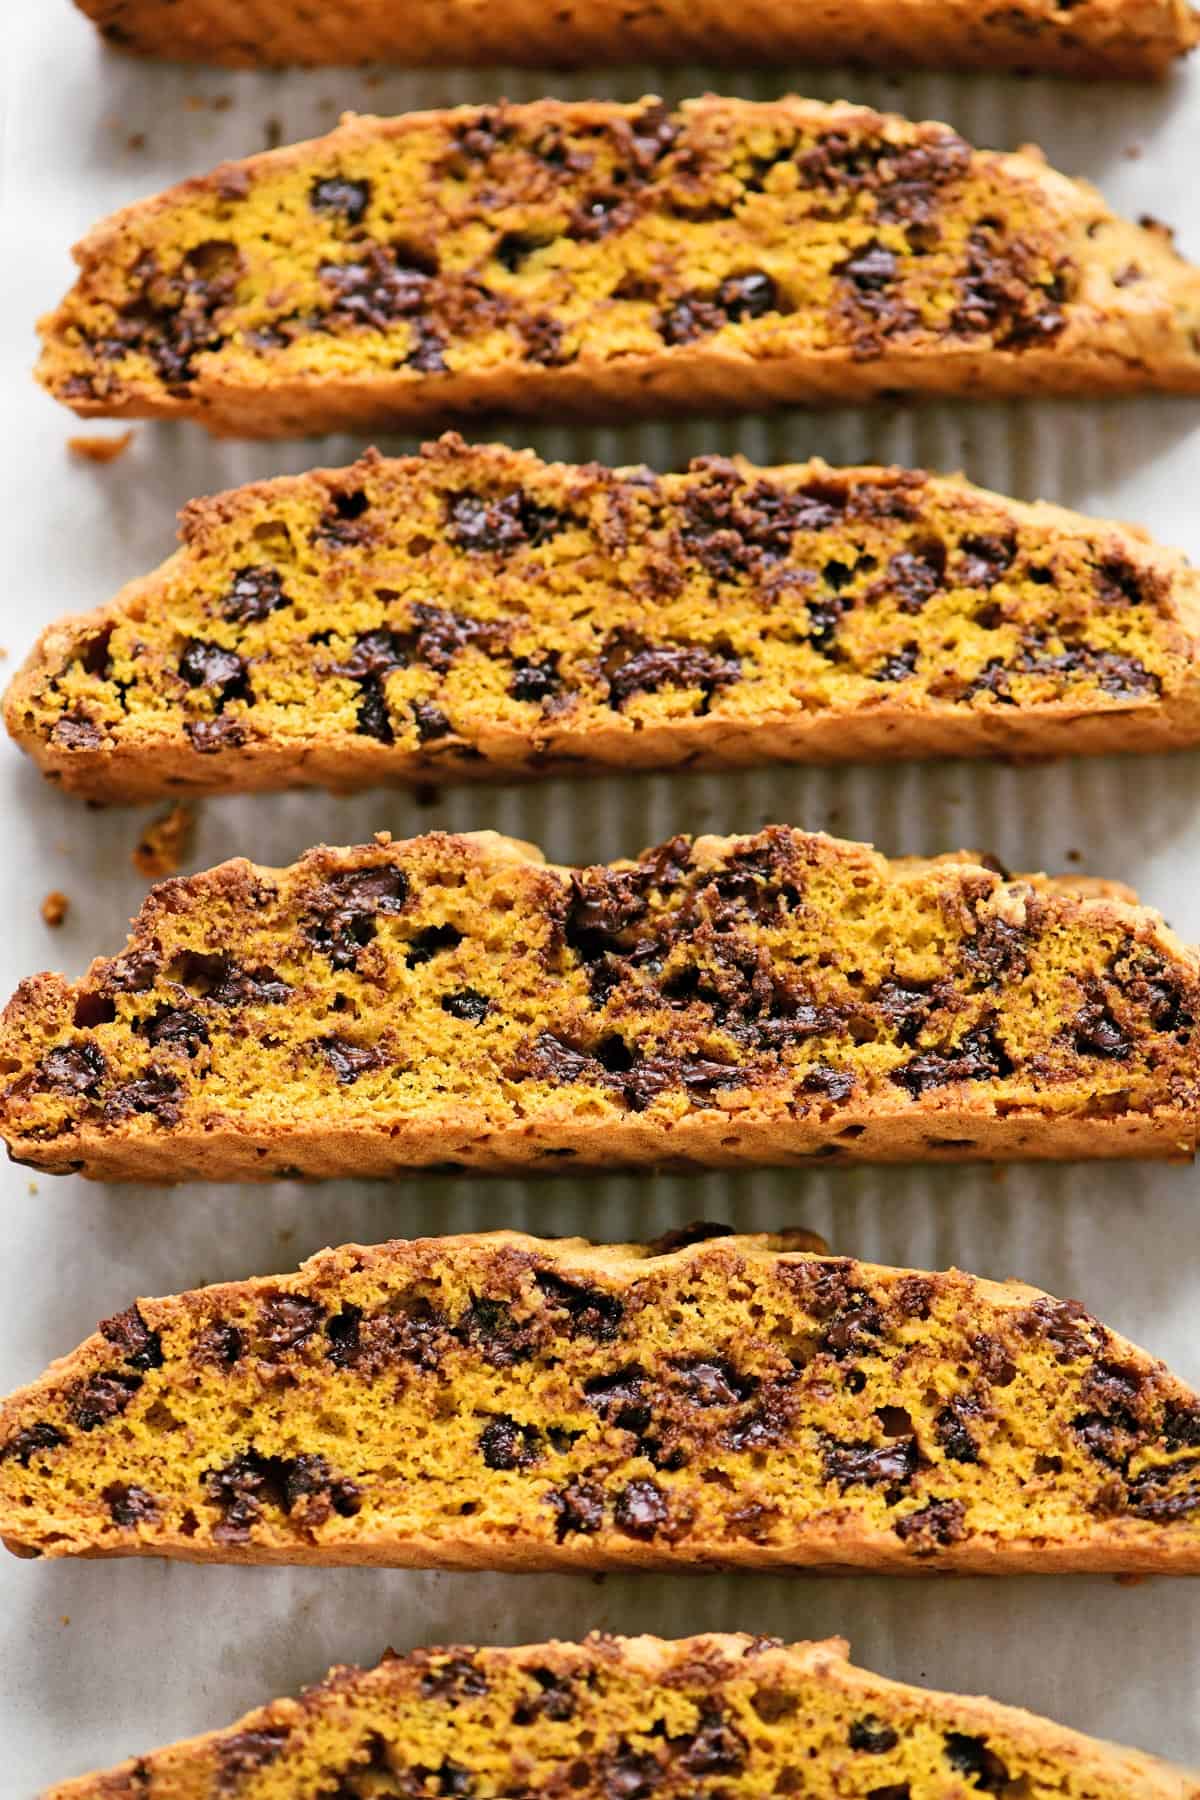 Chocolate chip biscotti on a baking sheet.